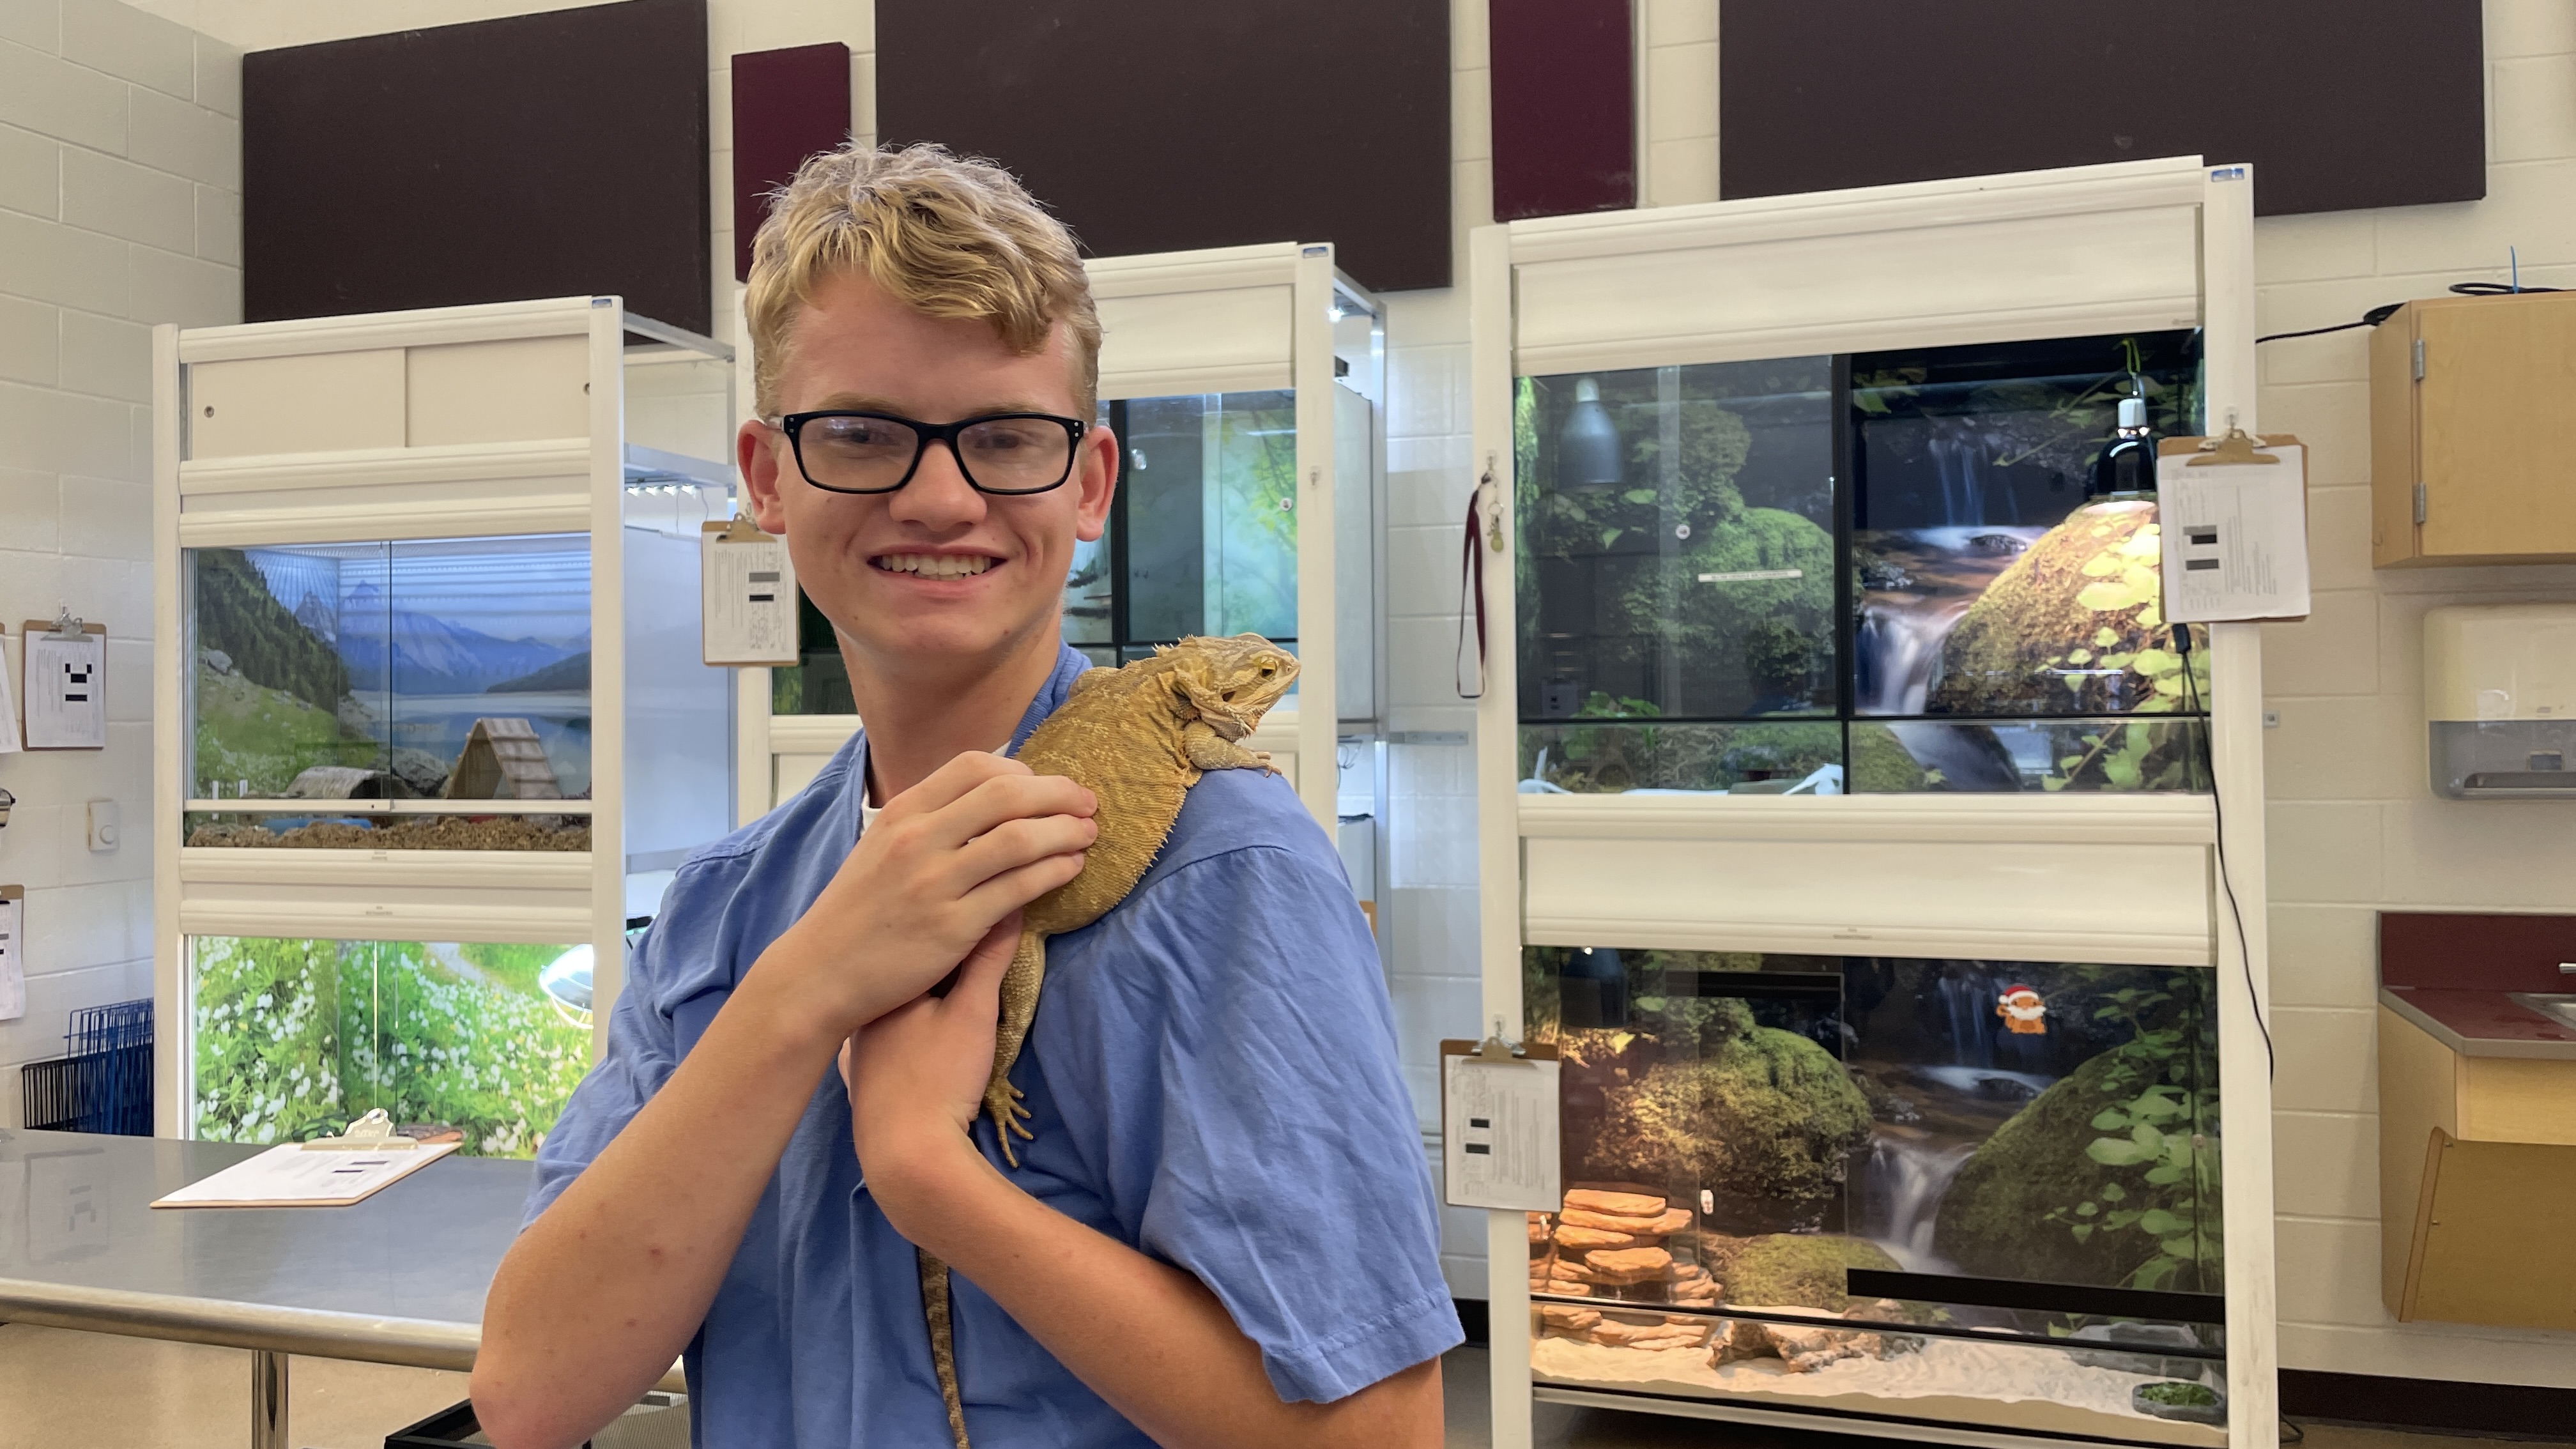 A White, male student lets a reptilian animal rest on his shoulder.